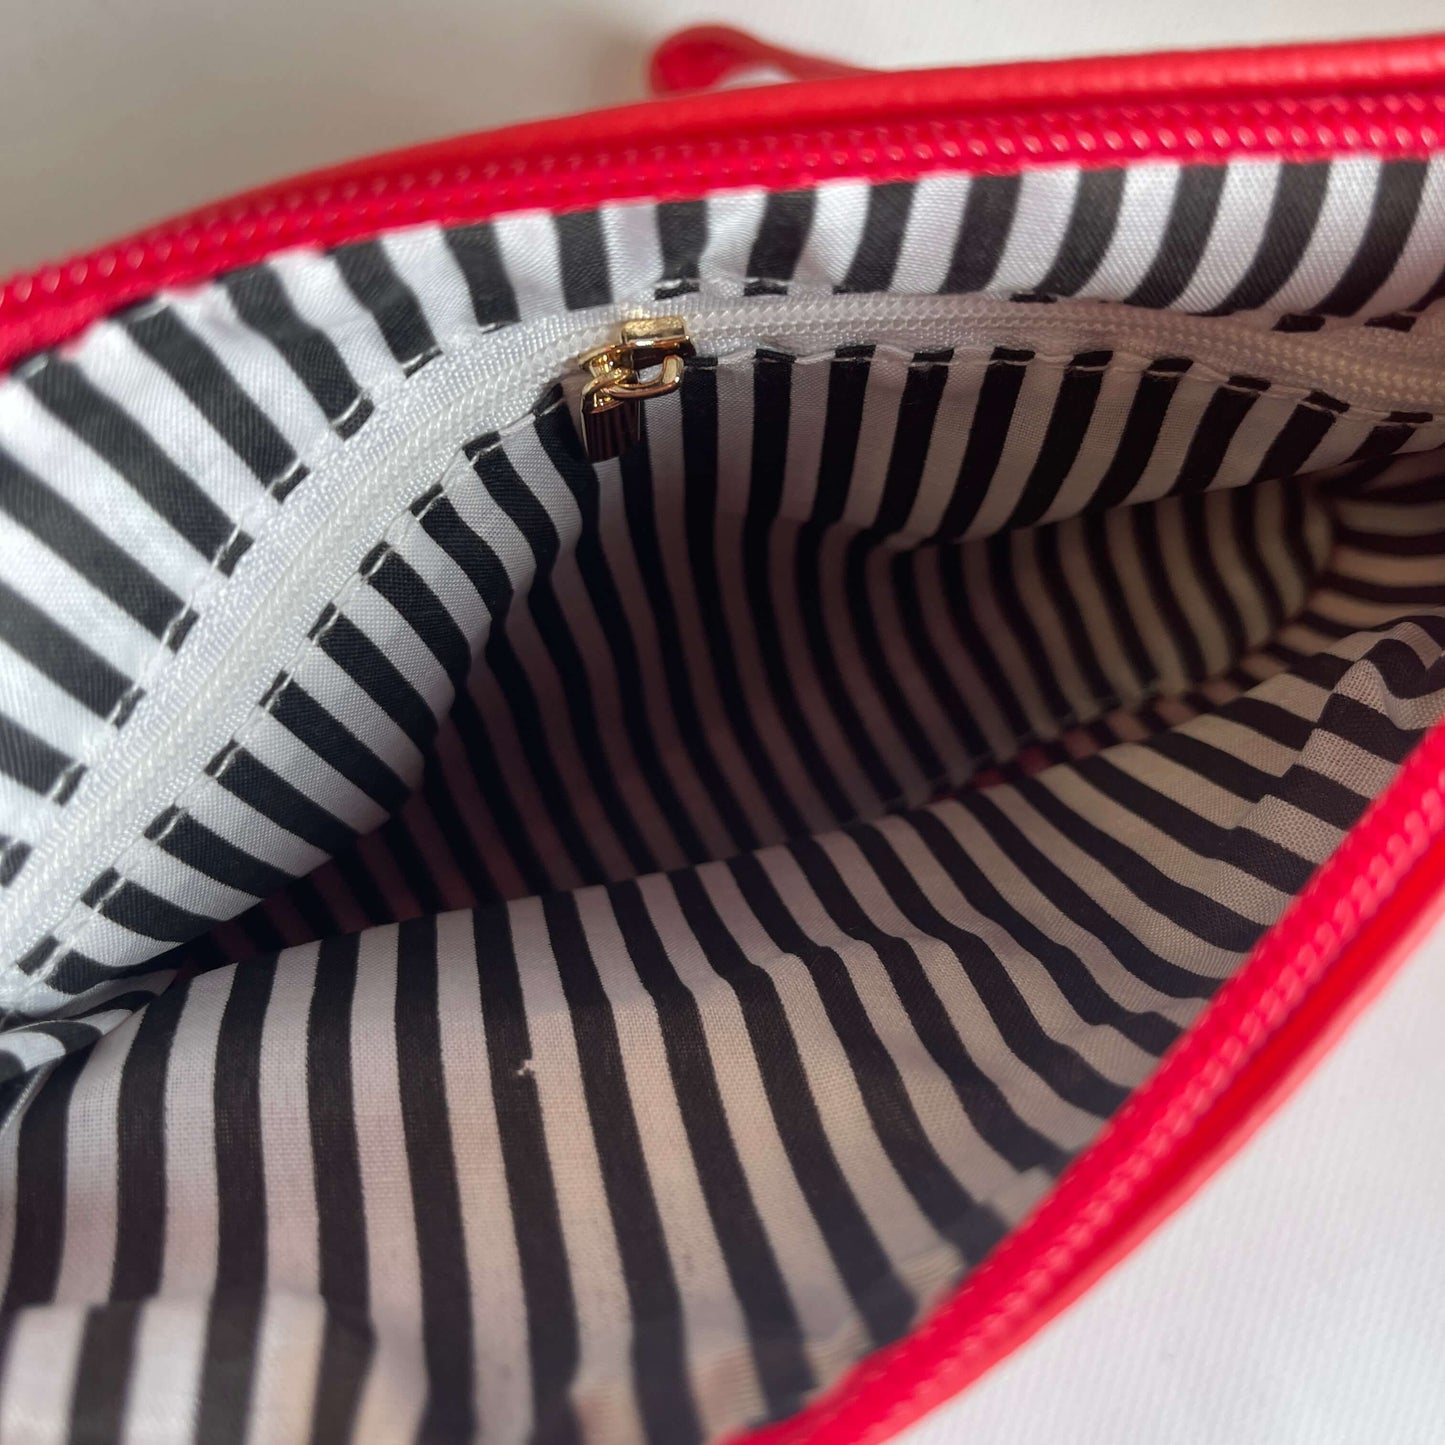 Inside lining of a red clutch bag.